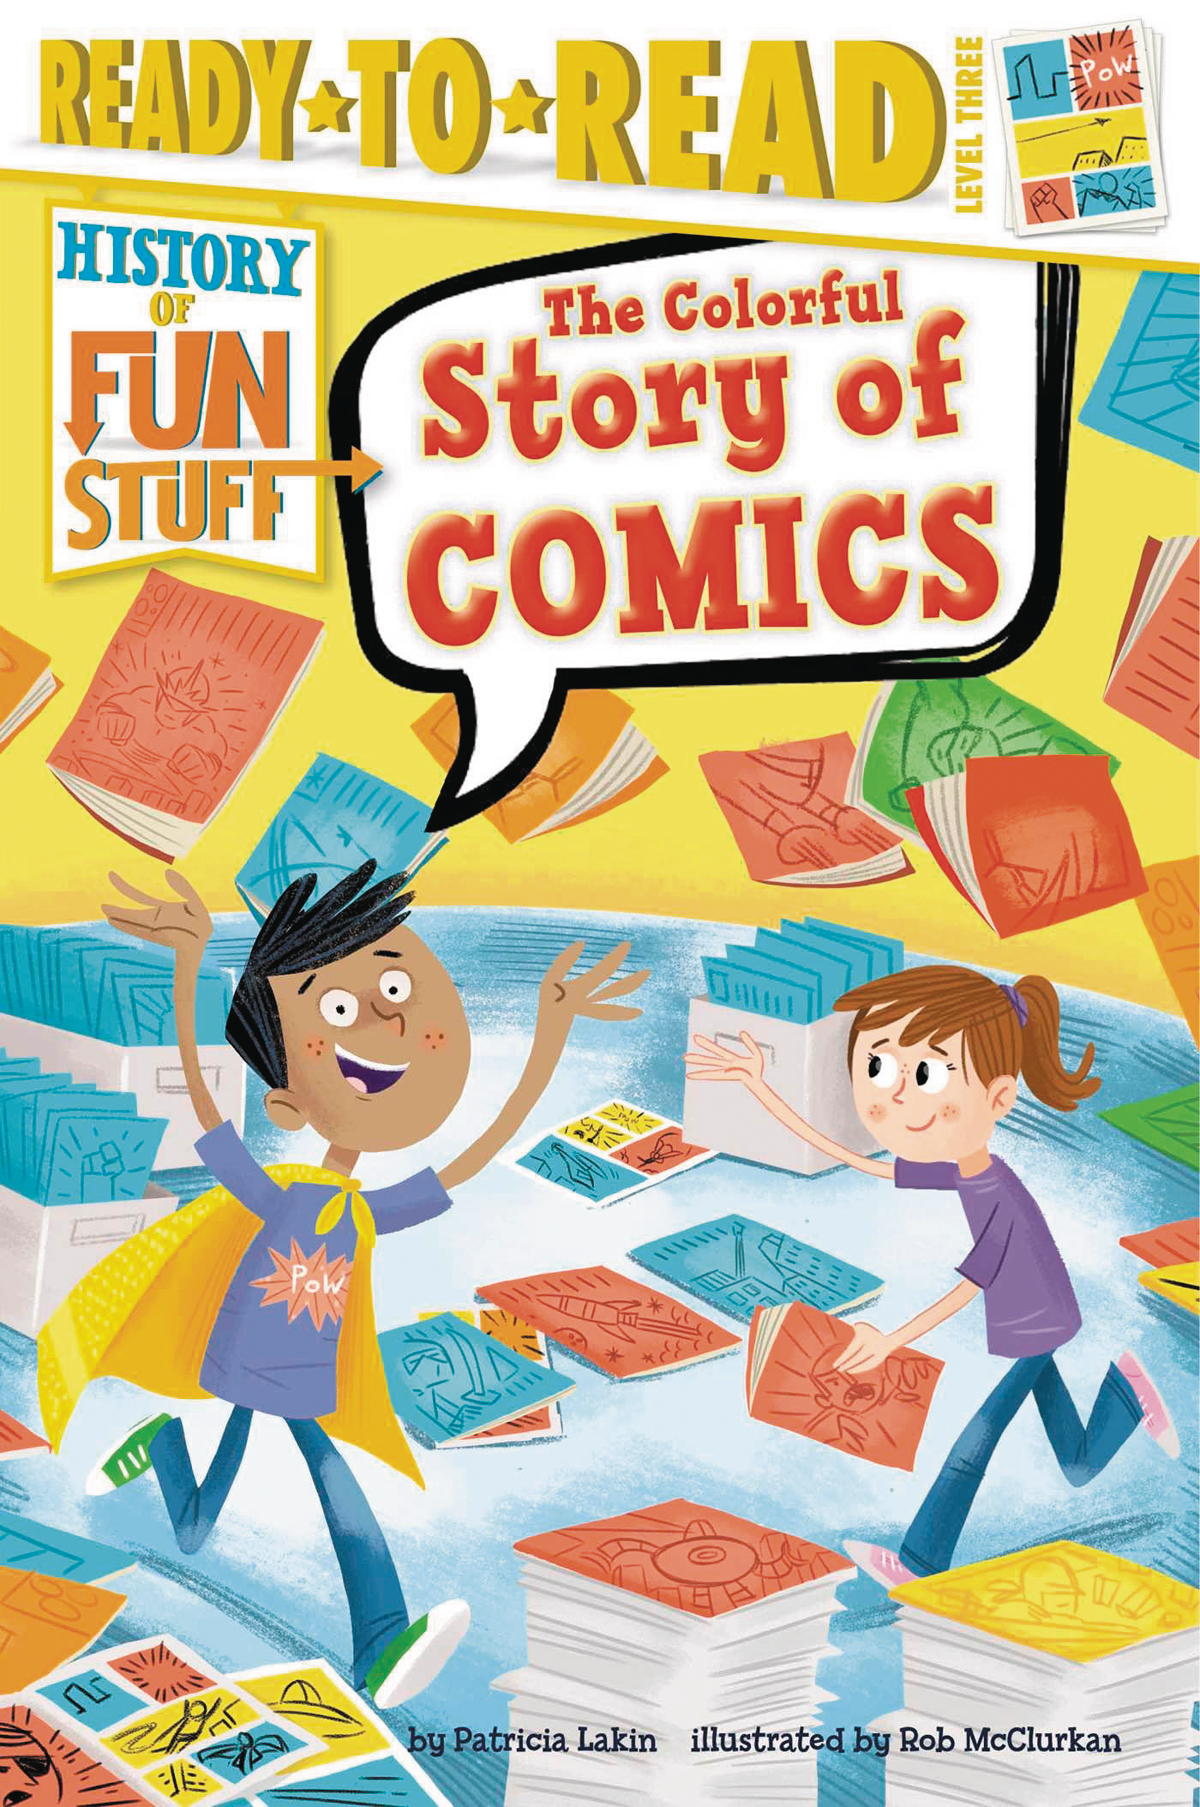 Colours story. Stuff to the stories игра. Story fun. Read stories. Fanstuff.